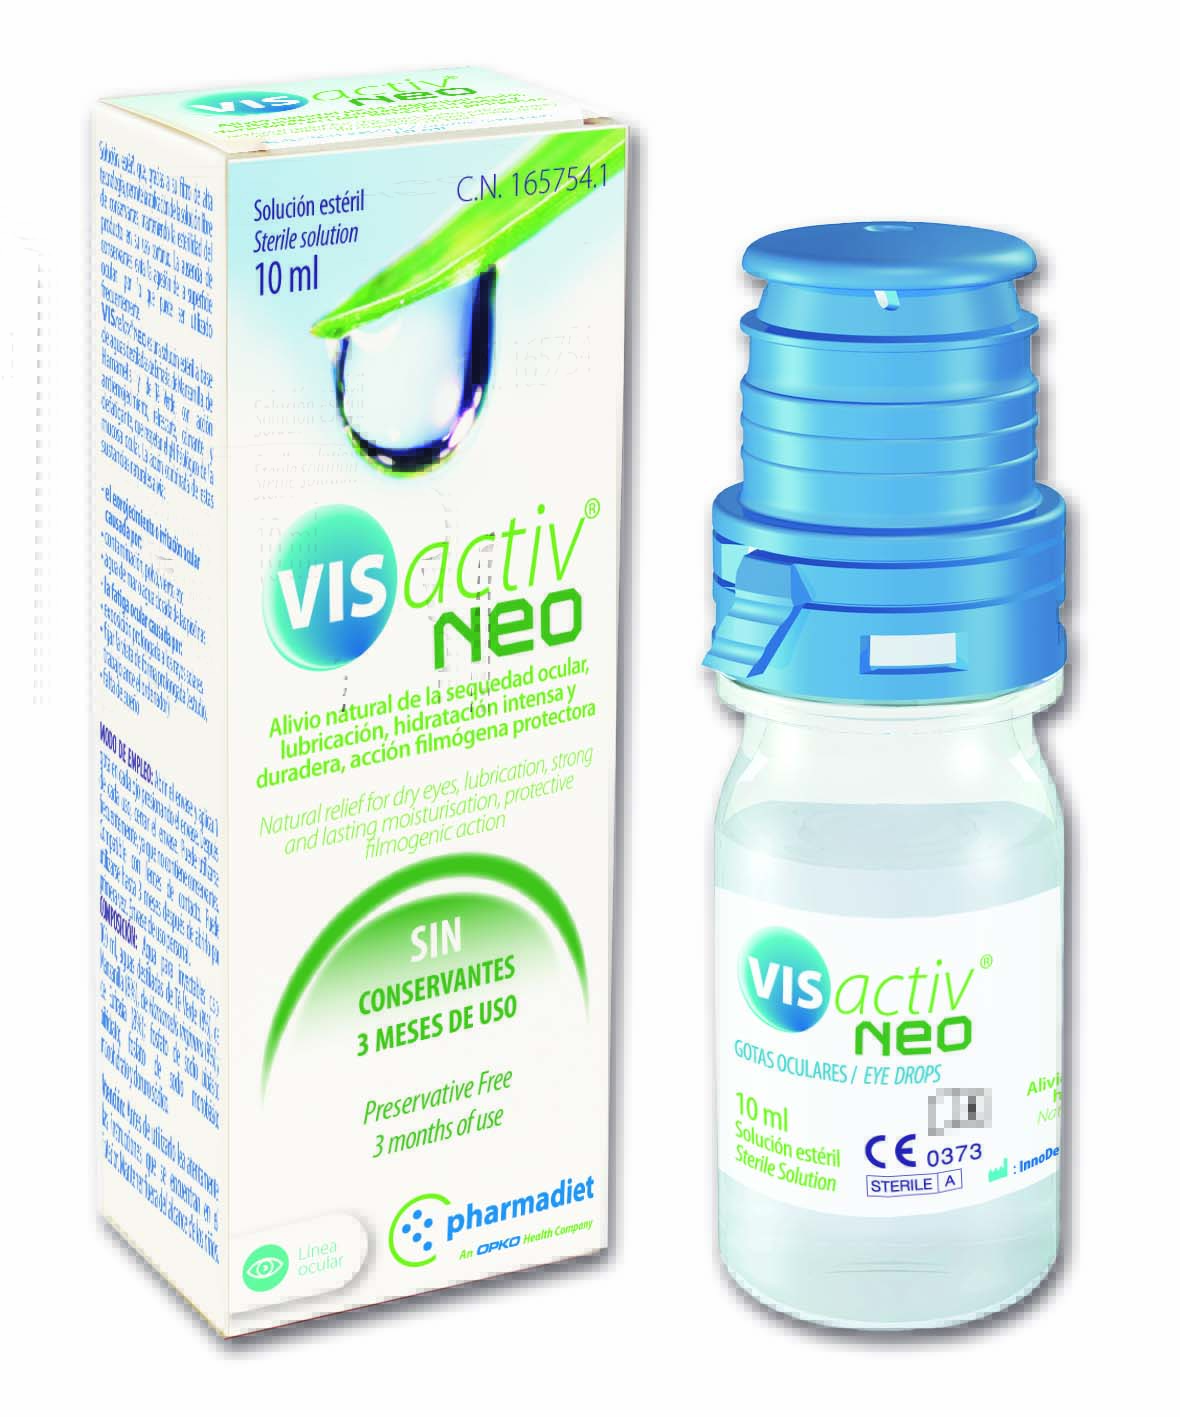 VISACTIVE NEO - EYE DROPS FOR OCULAR DRYNESS, PROTECTION AND RELIEF IN ALLERGIC PROCESSES